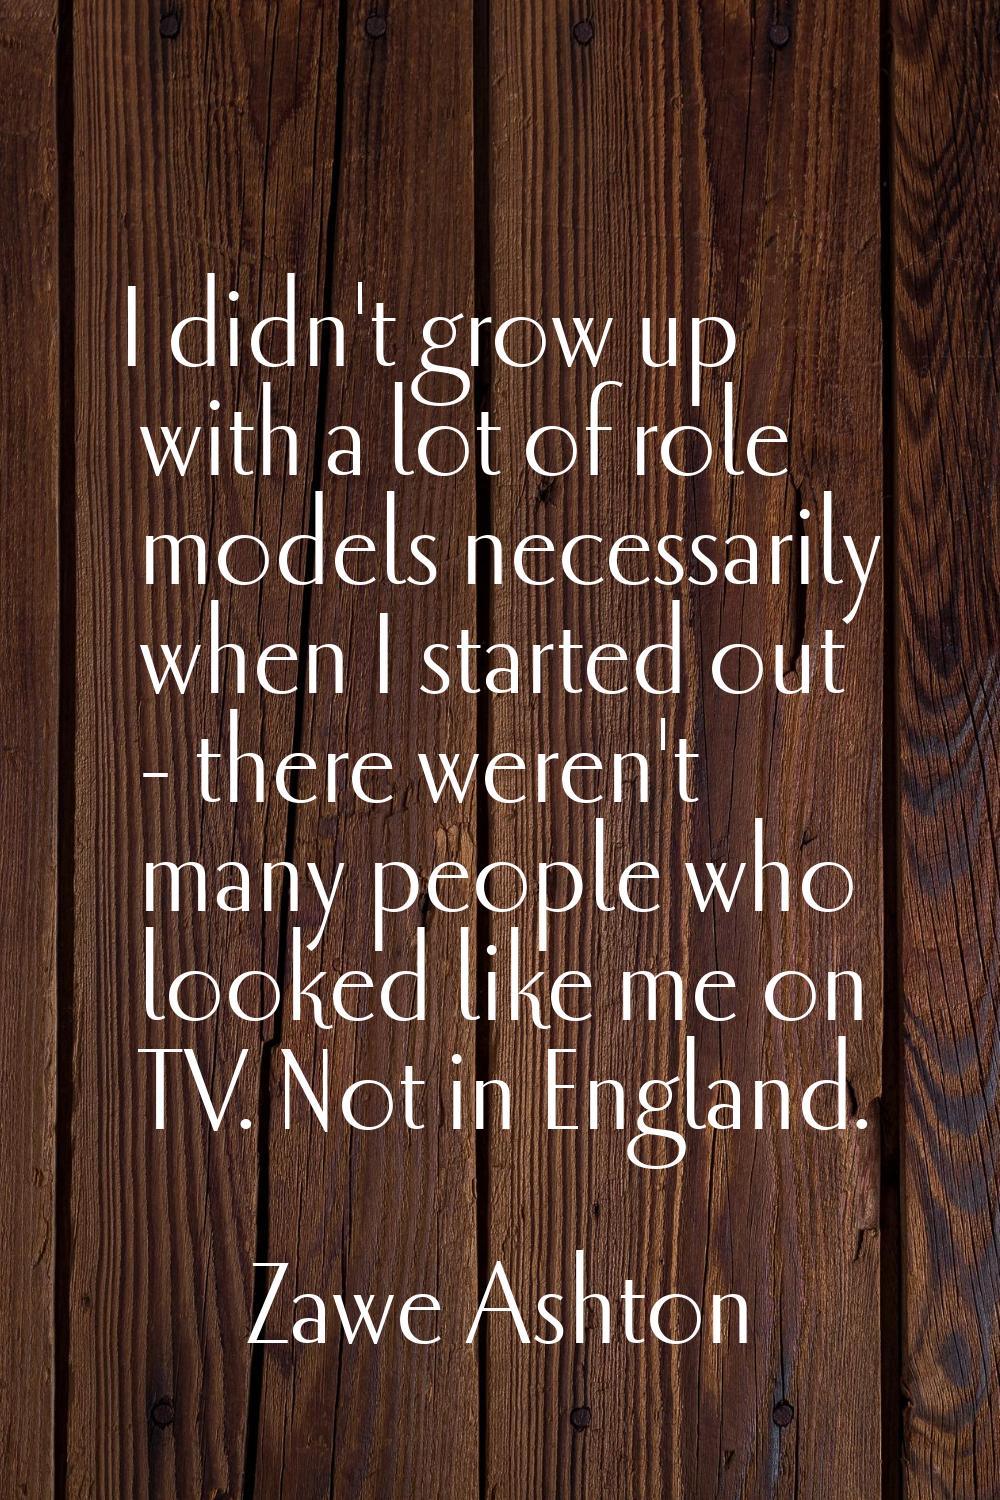 I didn't grow up with a lot of role models necessarily when I started out - there weren't many peop